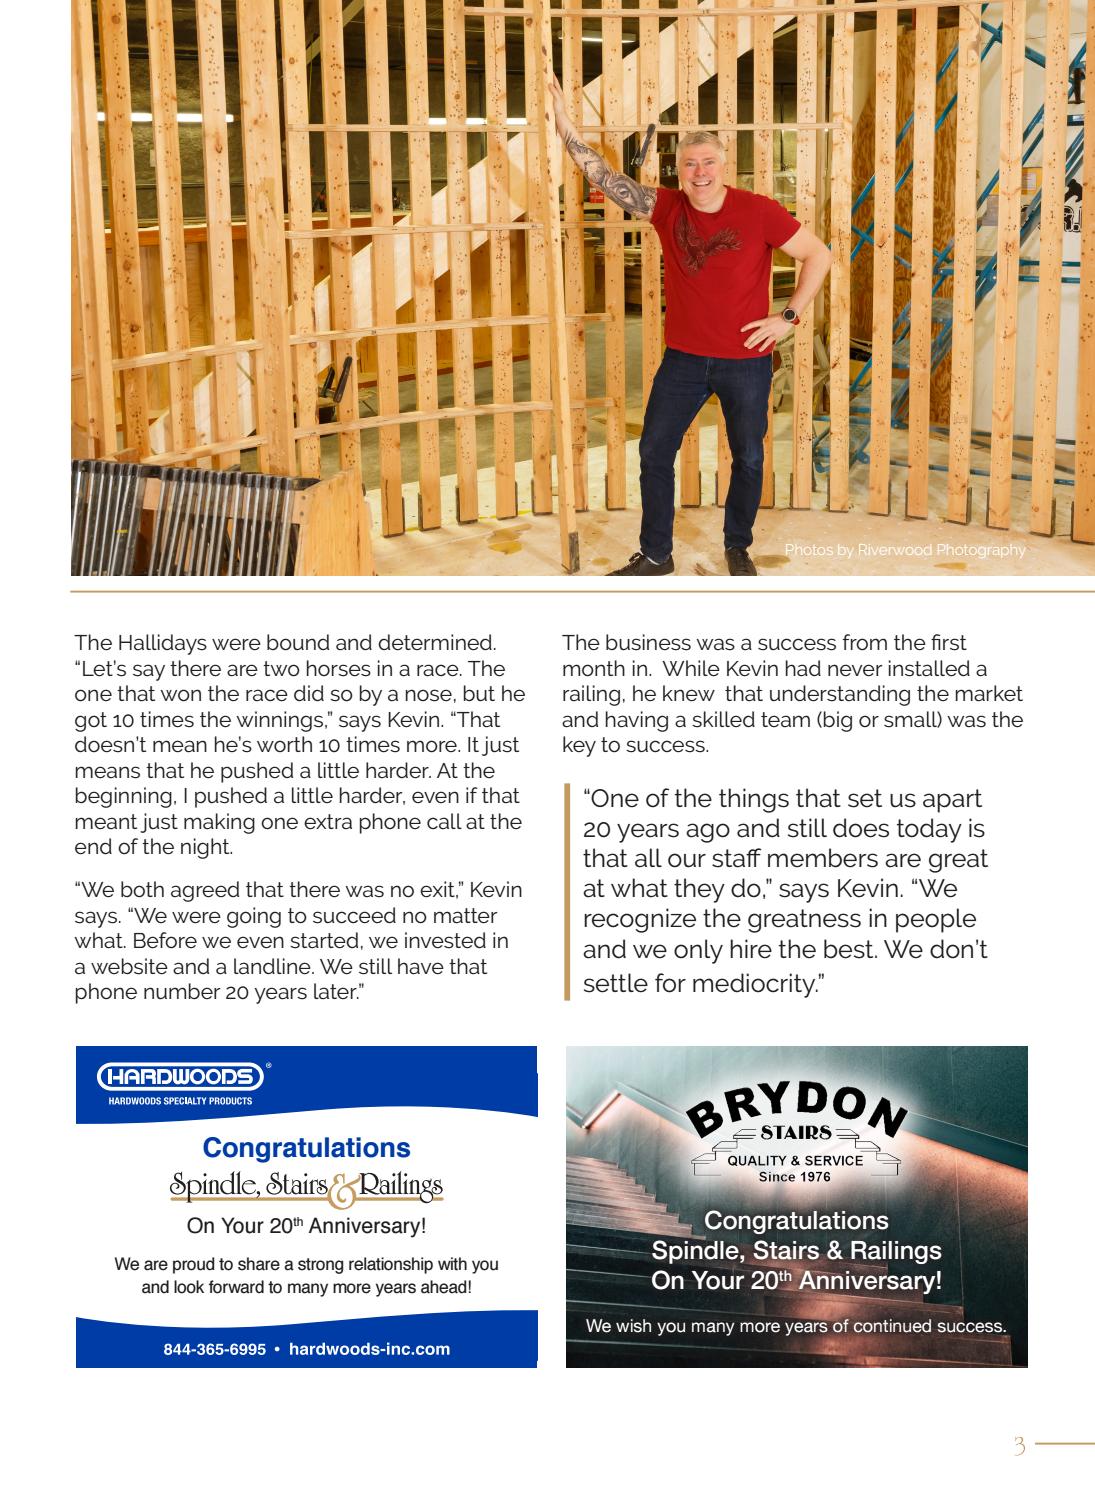 Business in Calgary Magazine - Business Profile for Spindle, Stairs, & Railings